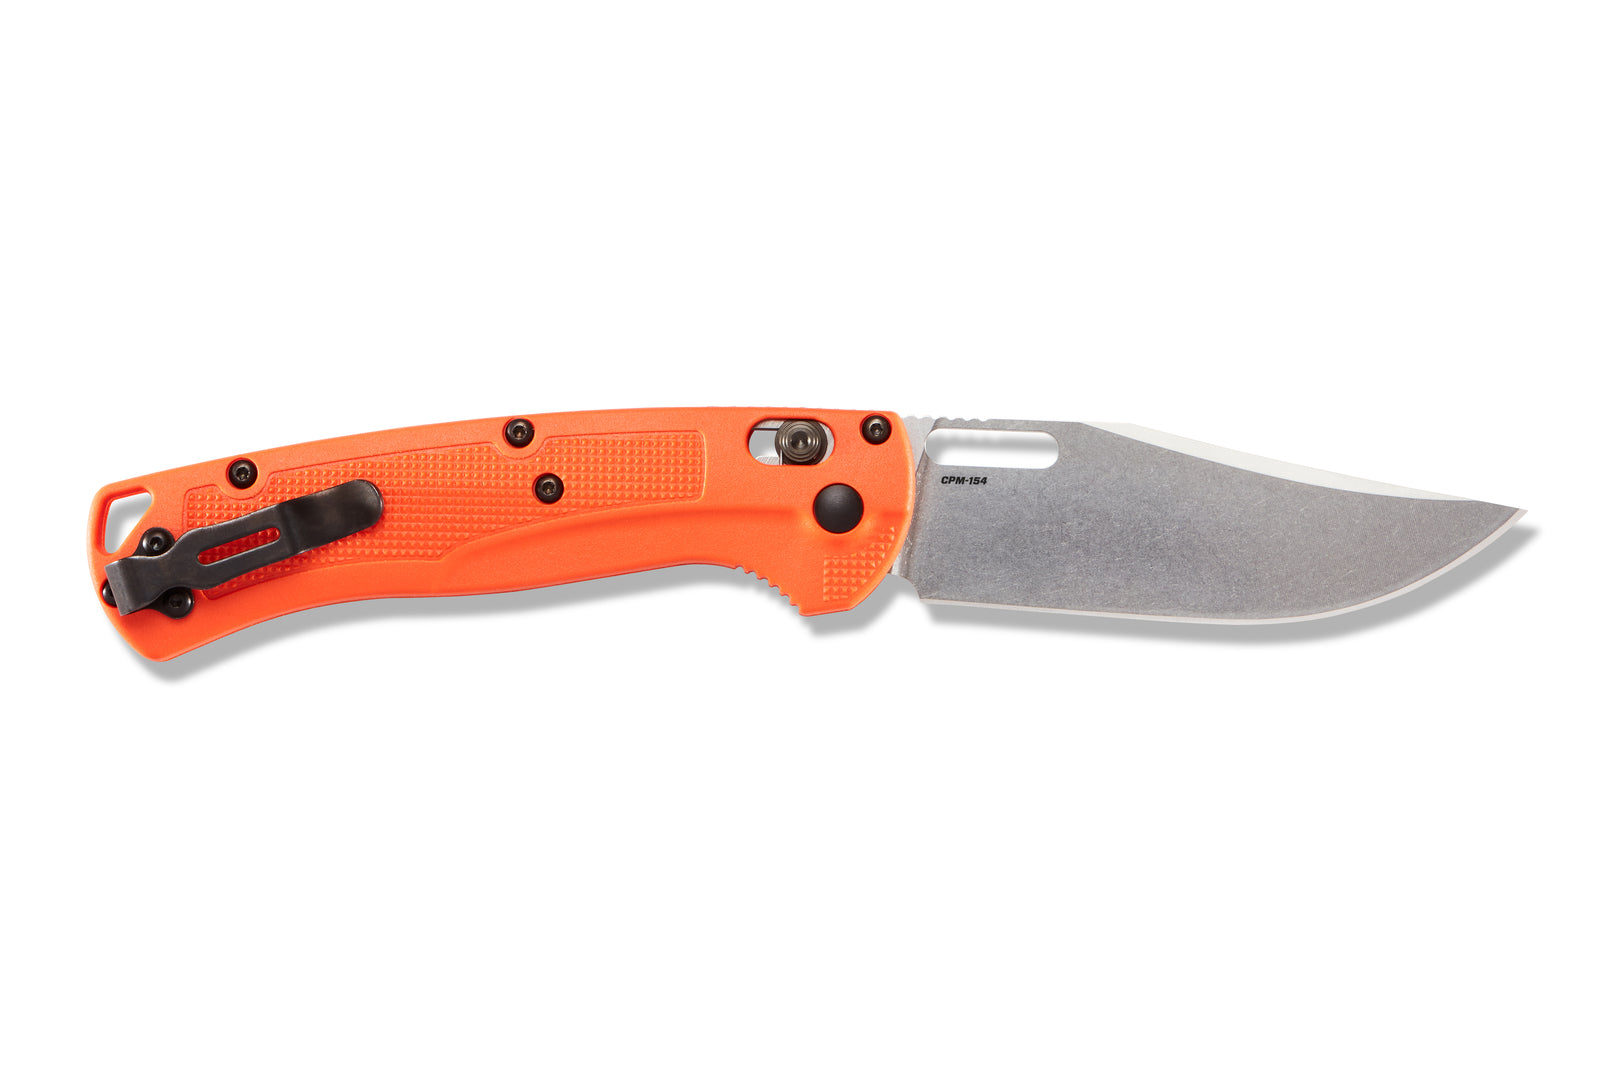 Benchmade 15535 Taggedout Axis Folding Knife - Wander Outdoors